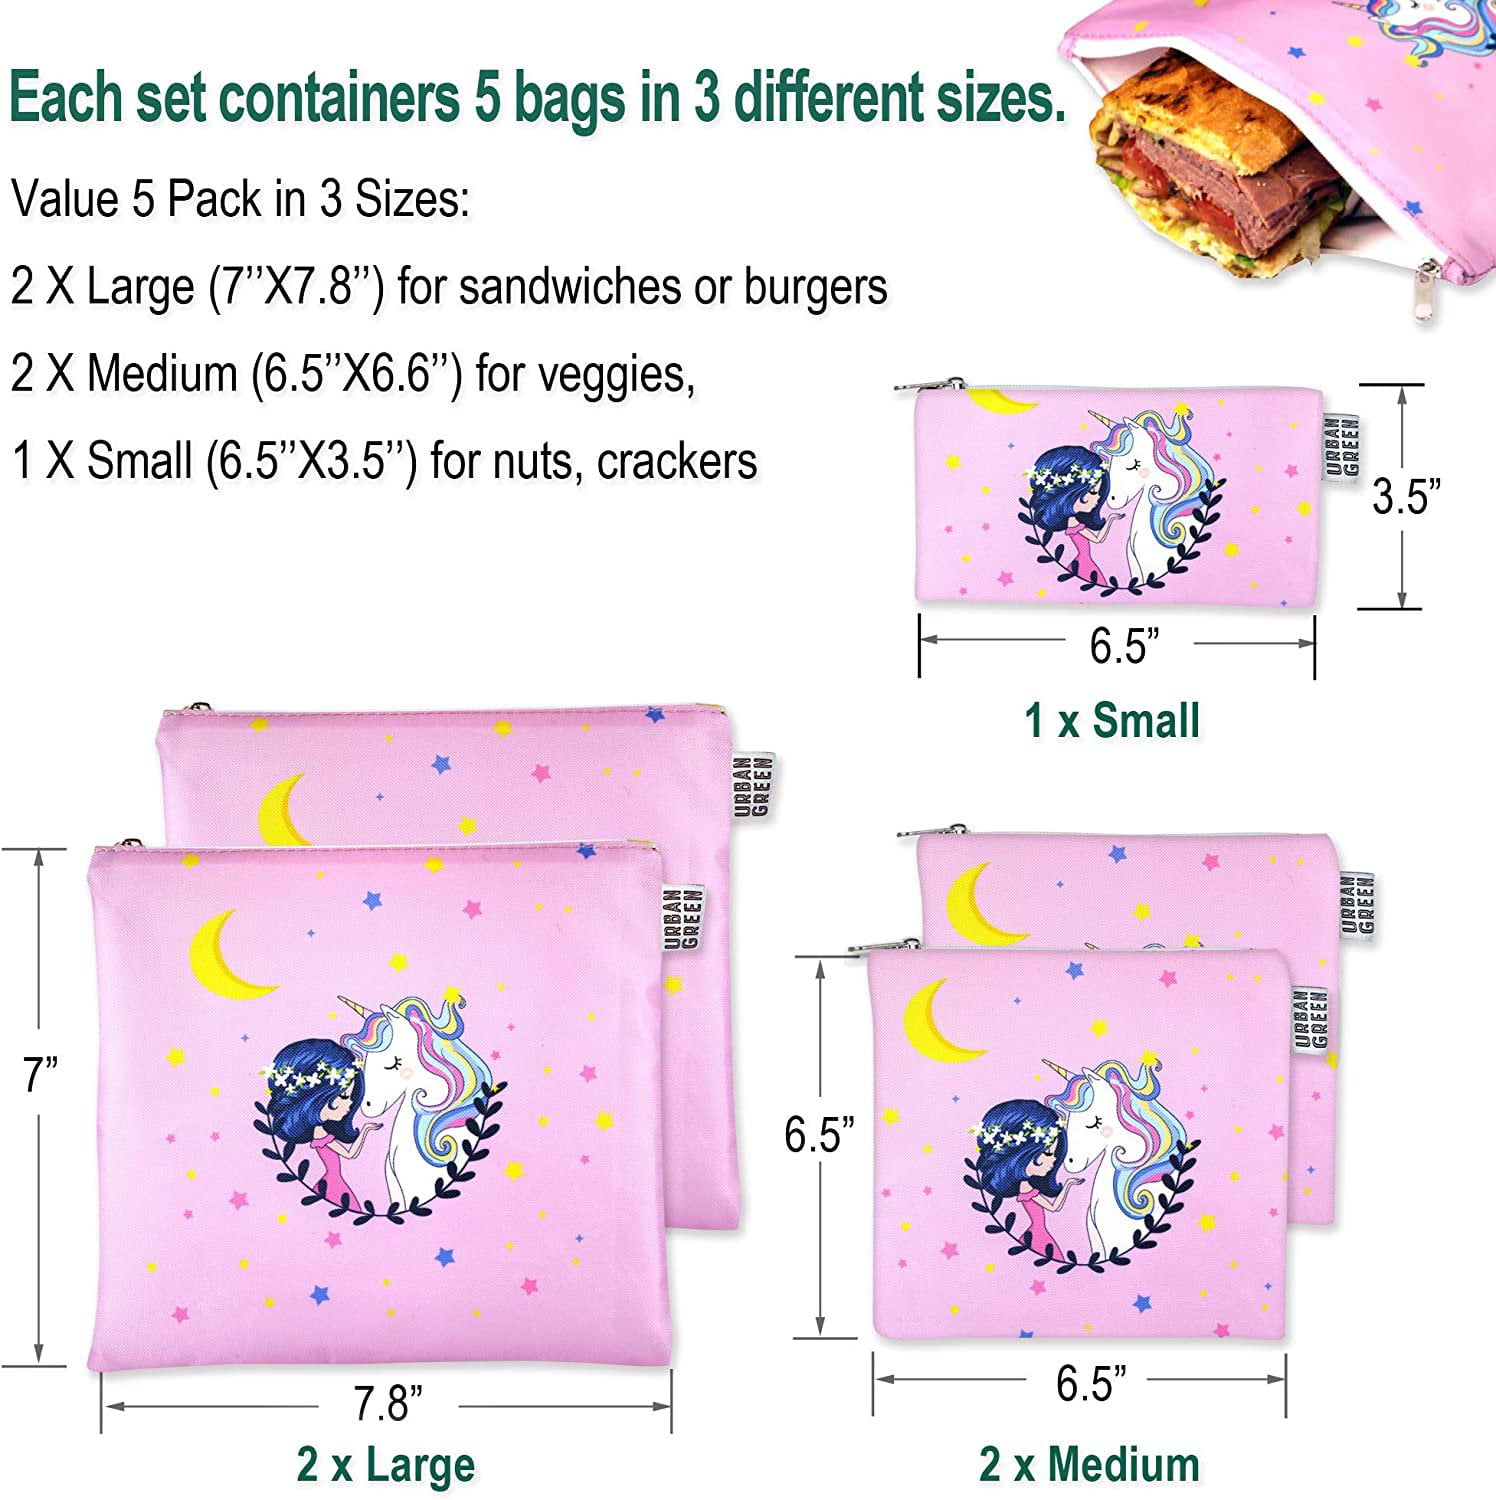 Reusable Snack Bags for Kids Urban Green, Kids Snack Containers, Reusable Sandwich Bag Kids, Dishwasher Safe, BPA Free, 5 Pack, Sandwich Reusable Bag